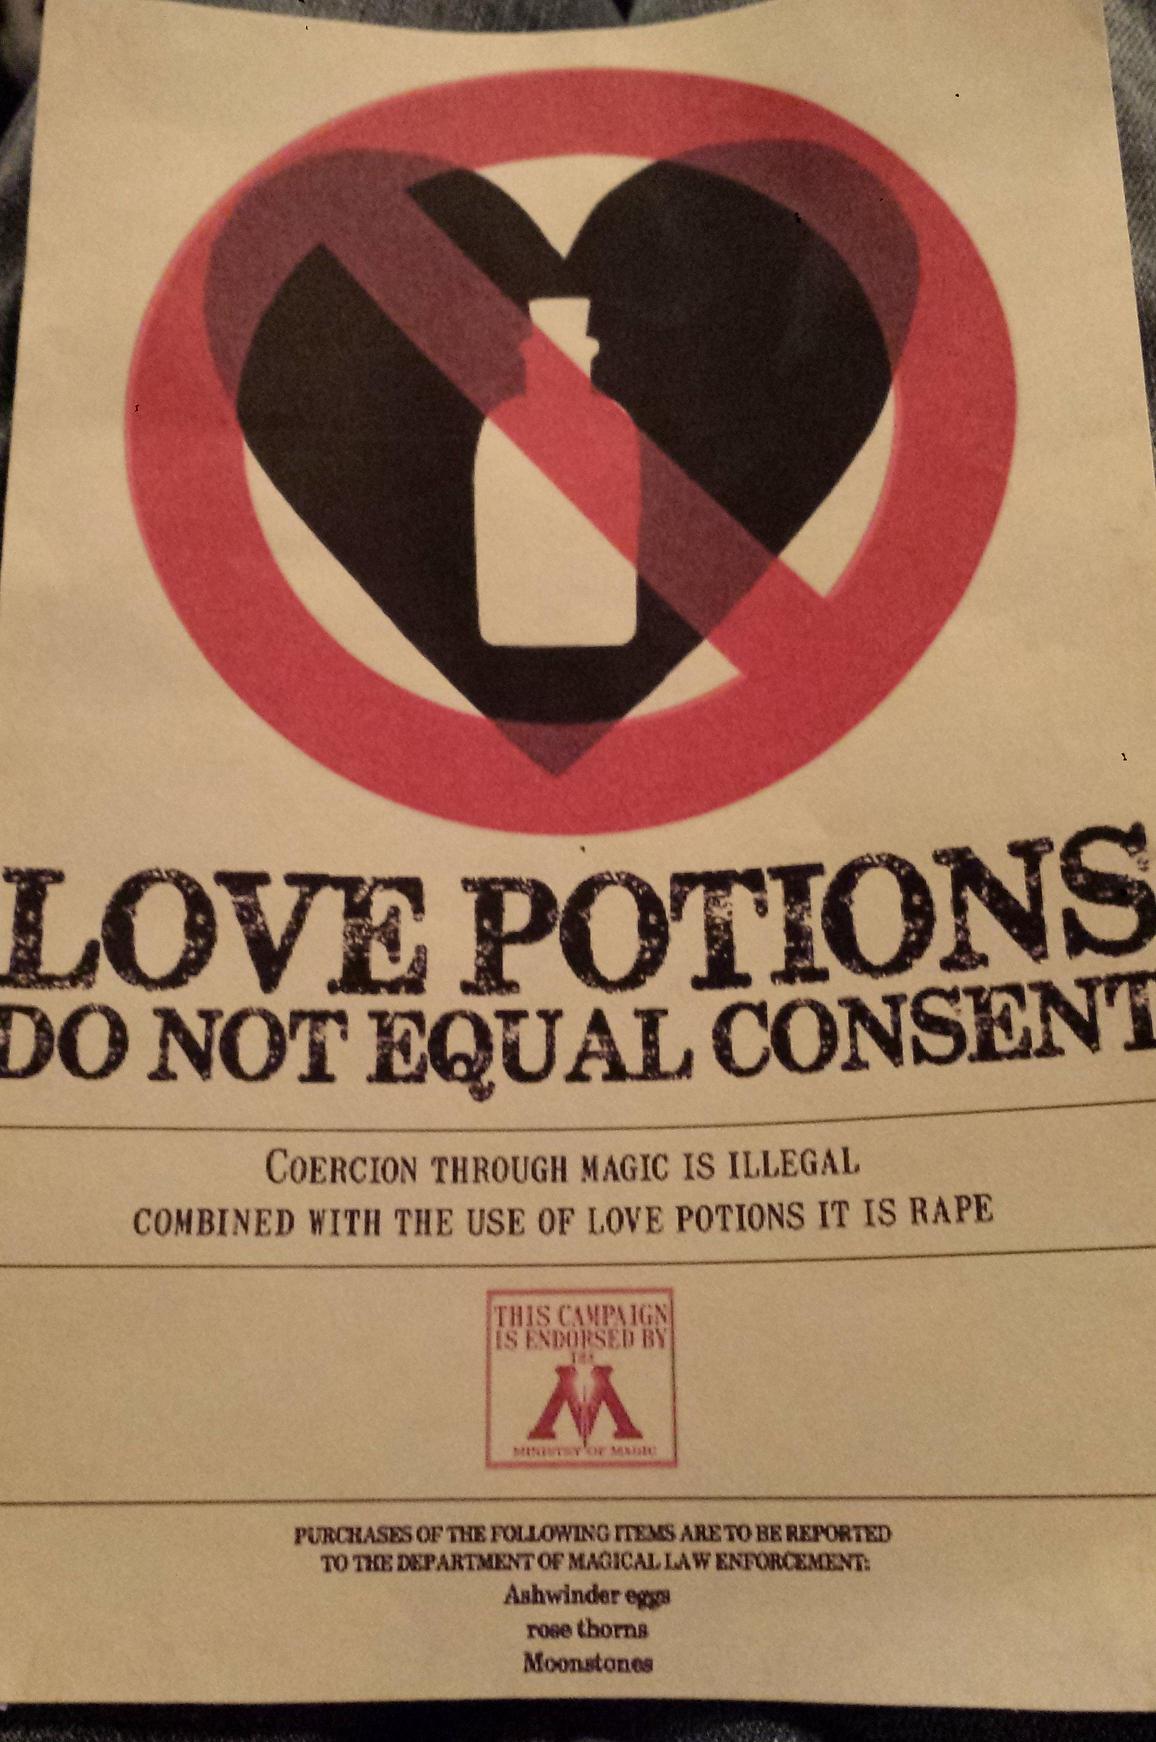 wizard_love_potions_do_not_equal_consent